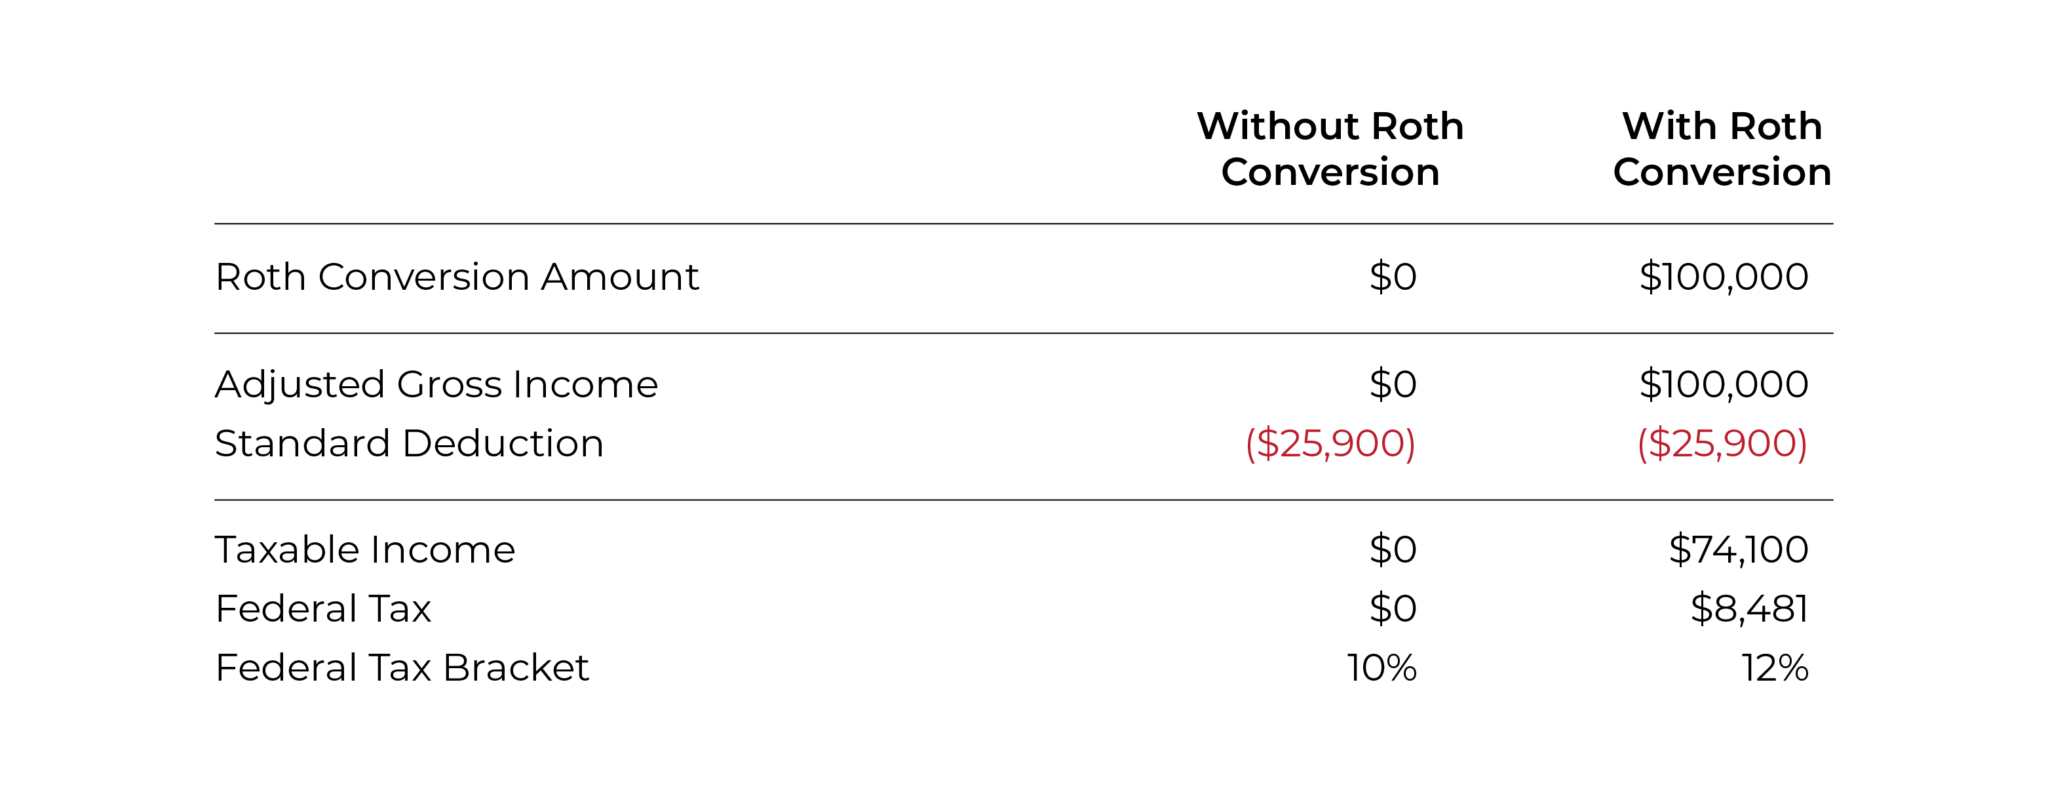 How To Calculate The Marginal Tax Rate Of A Roth Conversion